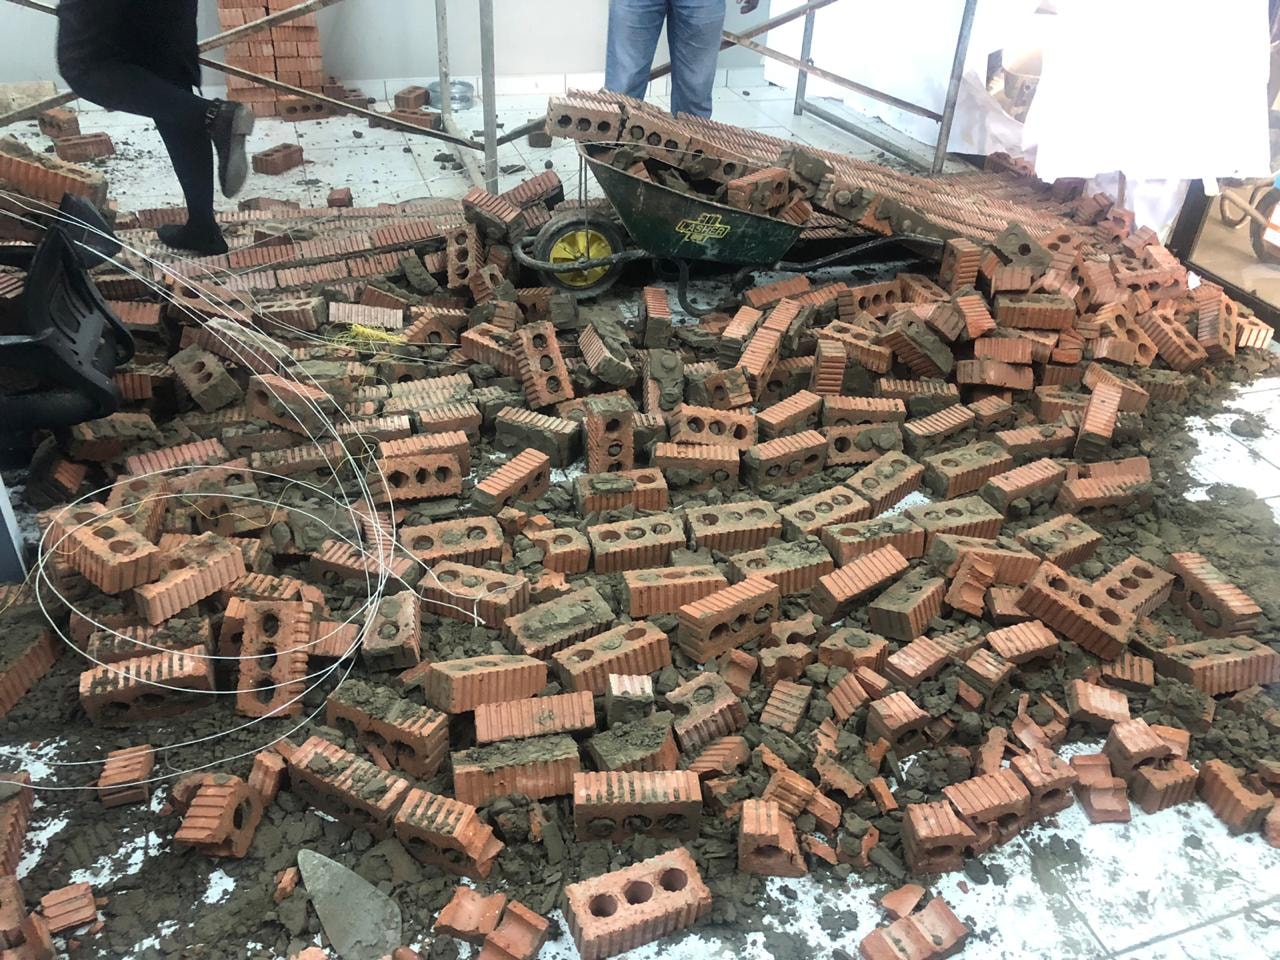 Two injured in a wall collapse in Verulam